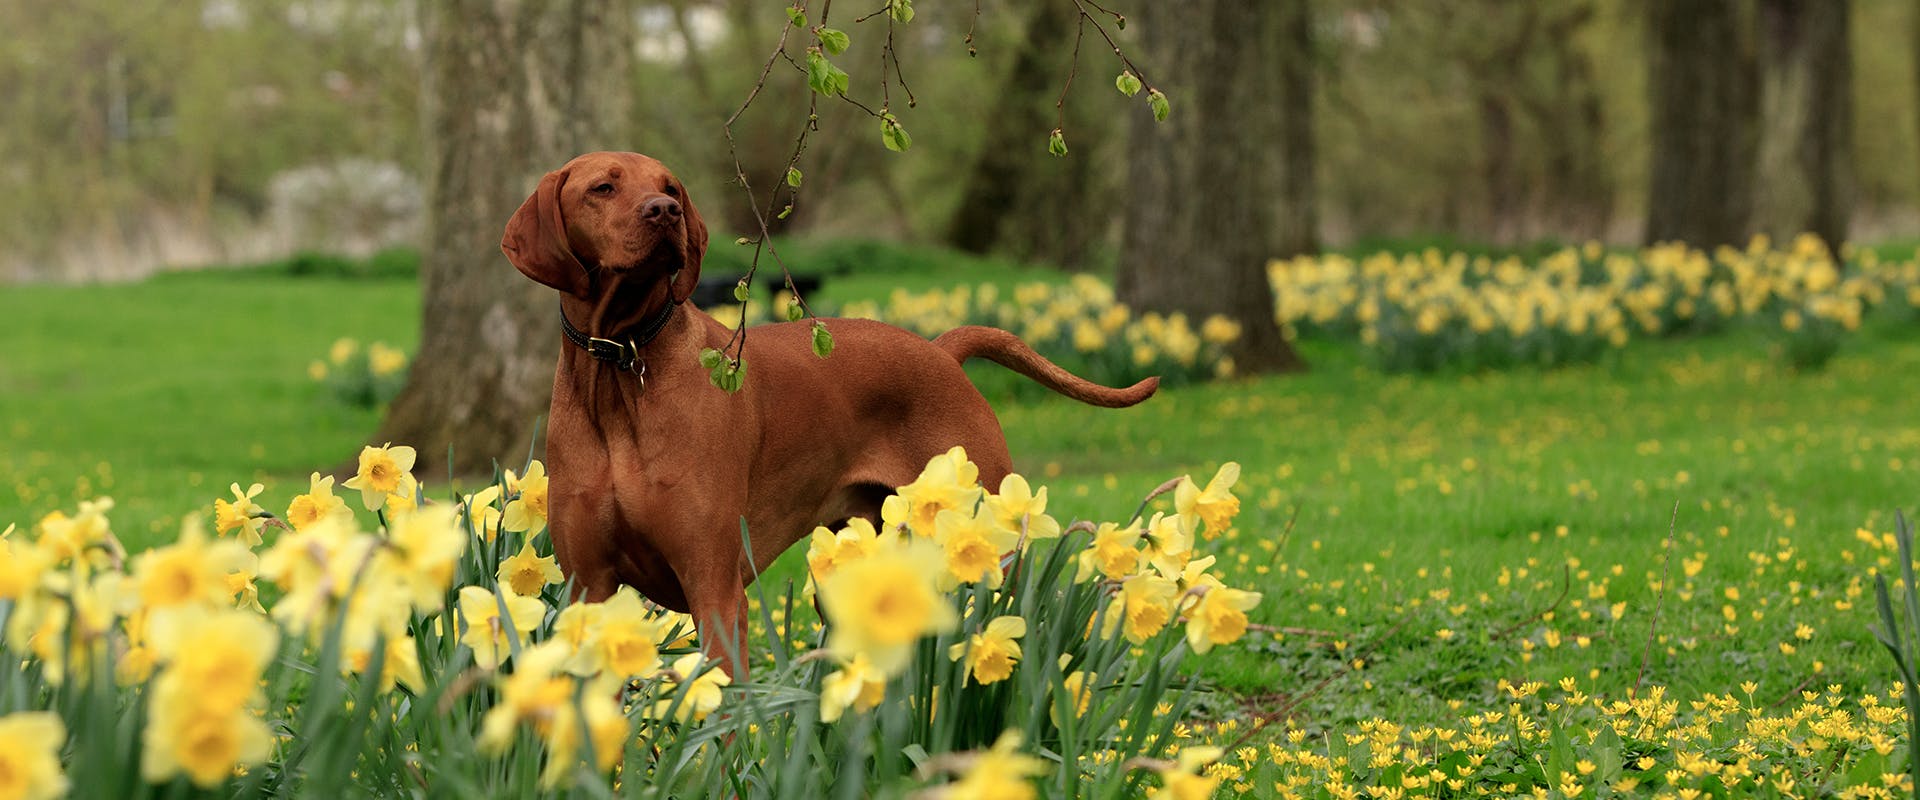 A dog standing in a park surrounded by daffodils